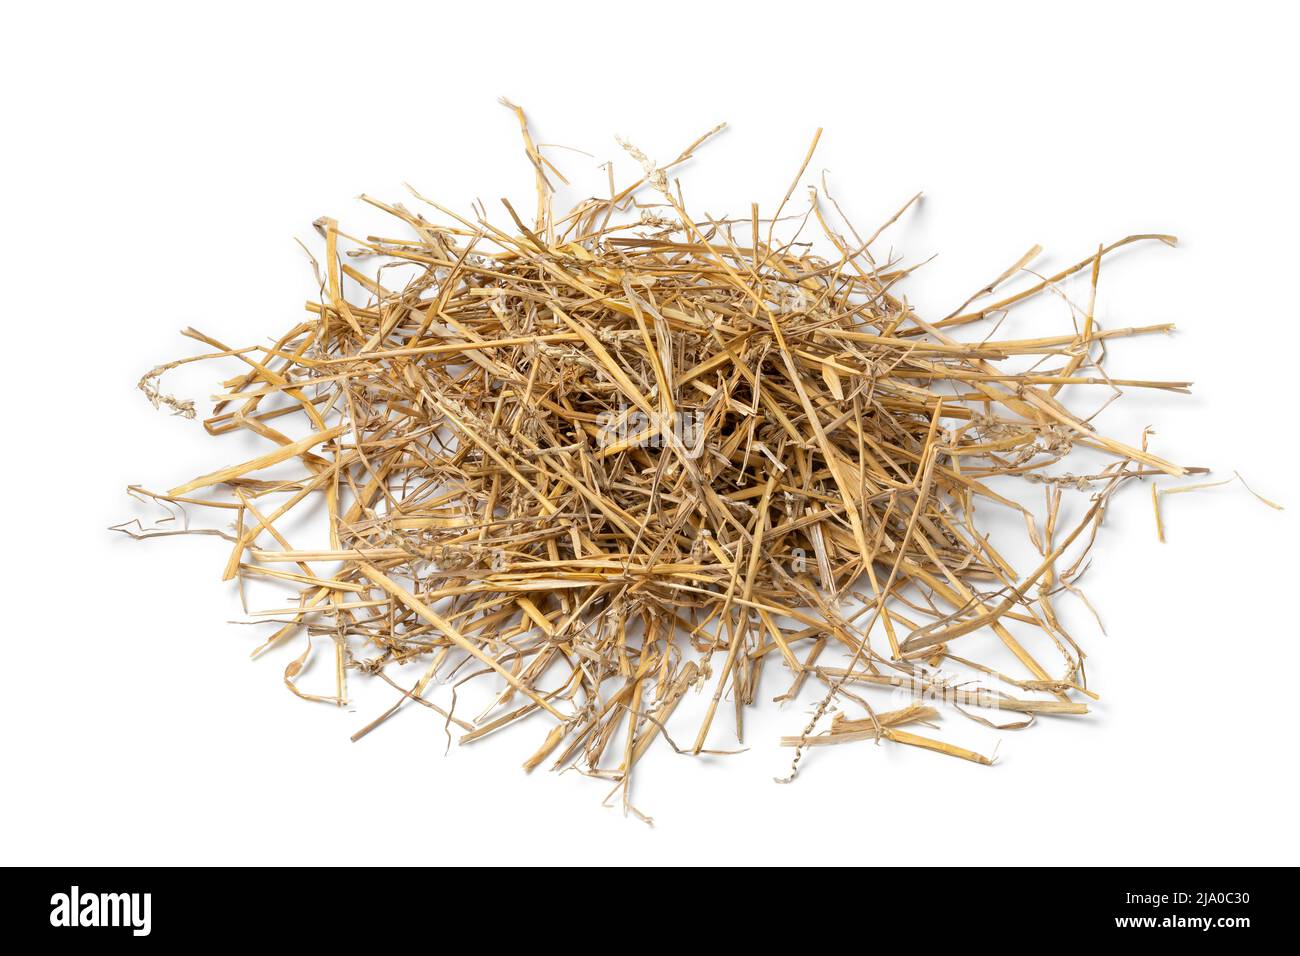 Heap of dried straw isolated on white background Stock Photo